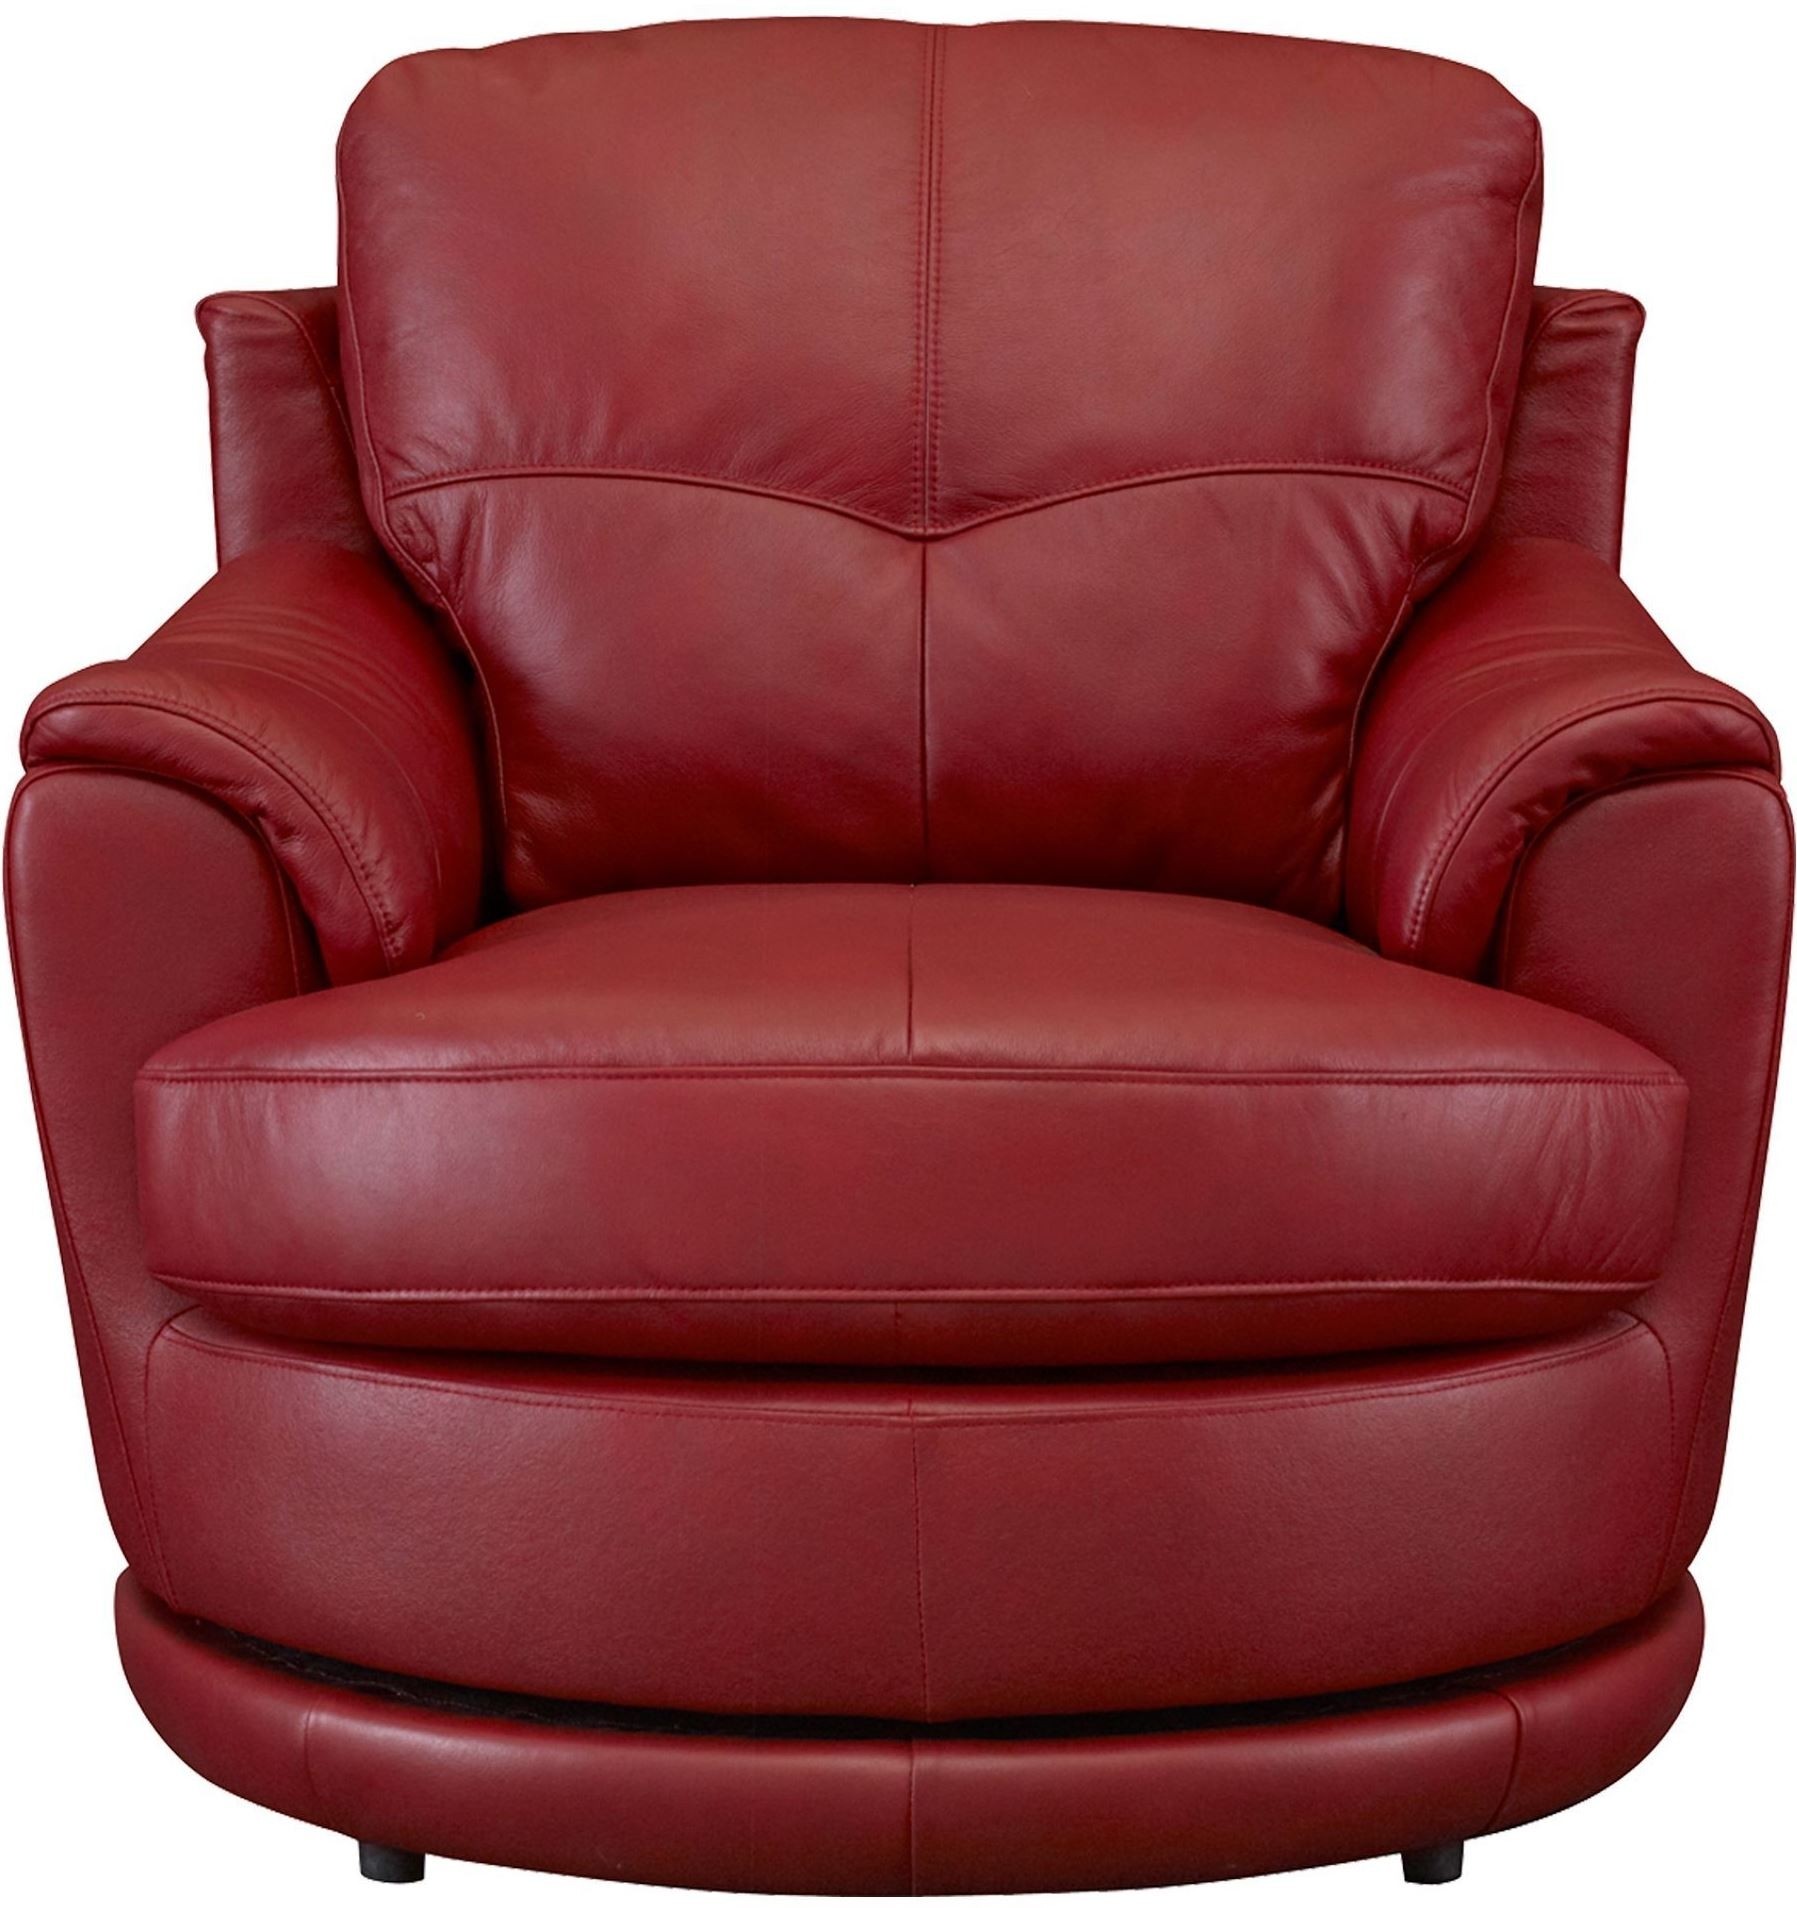 Globe red swivel chair from leather italia 1444 m1073